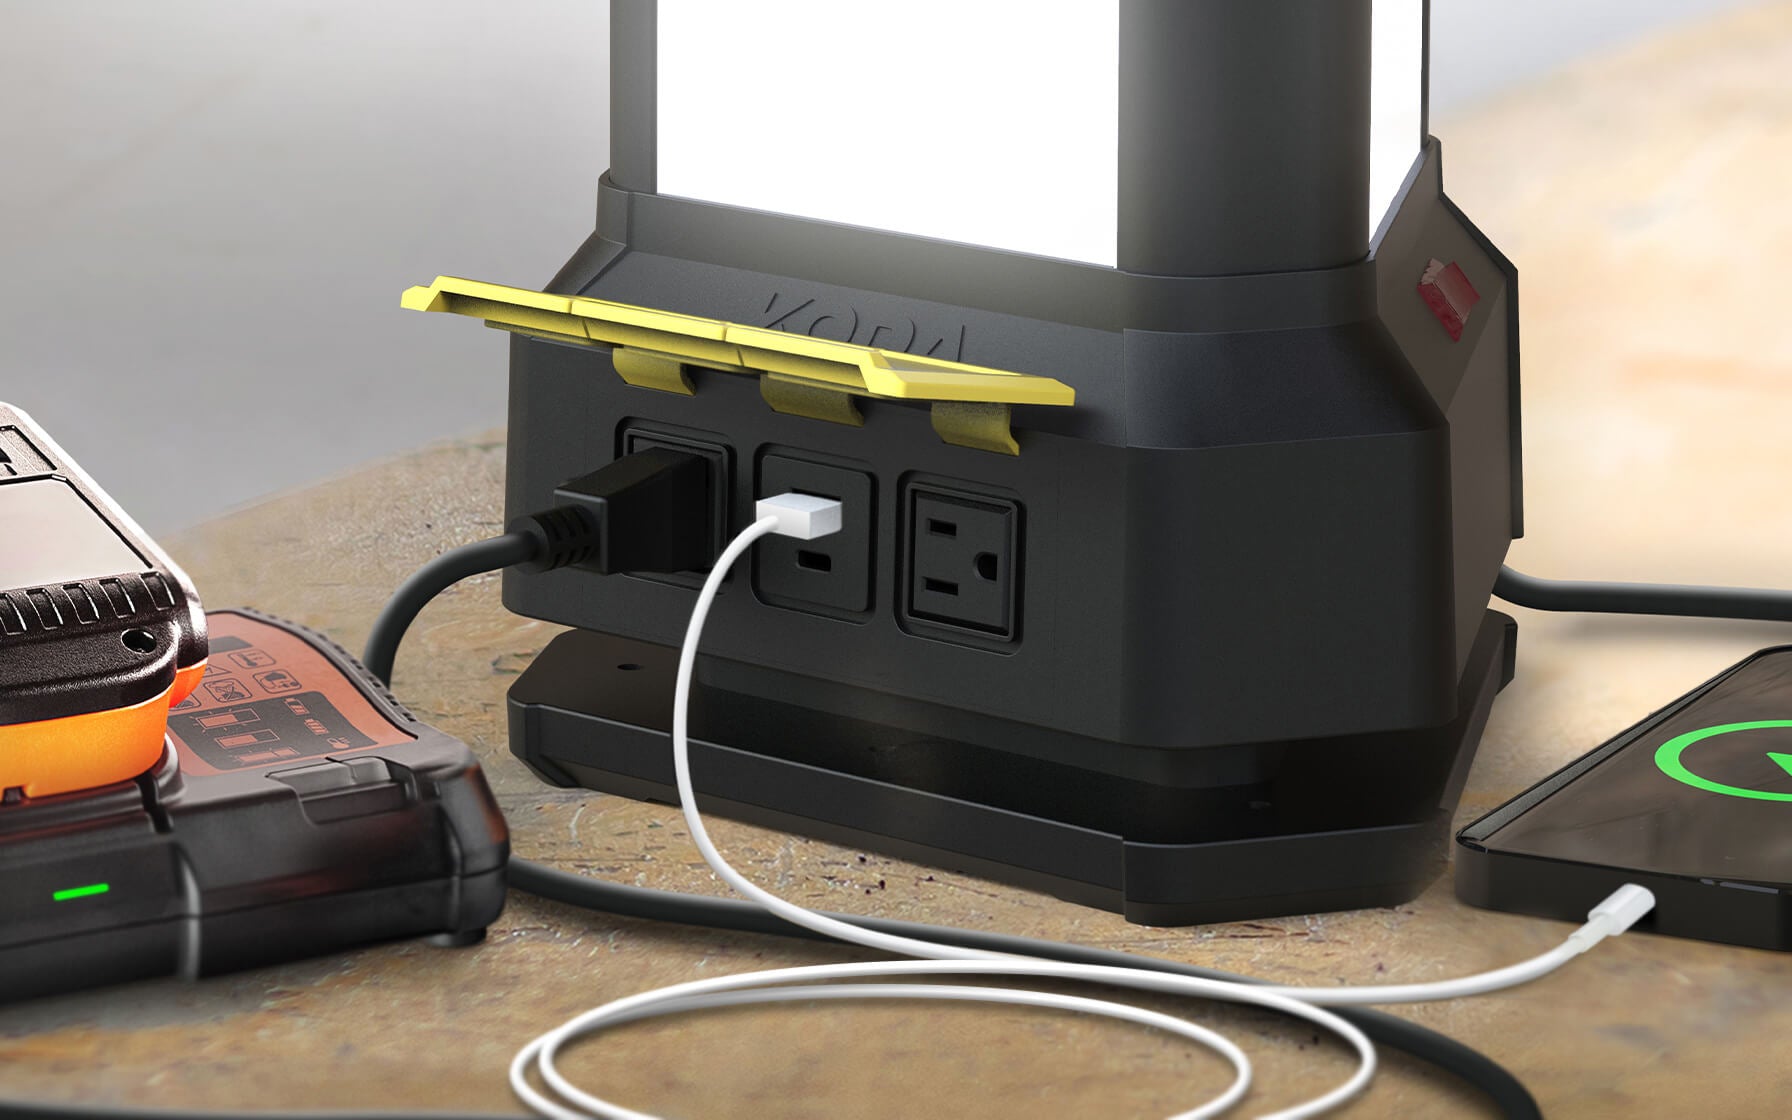 Power-up Tools & Charge Devices 